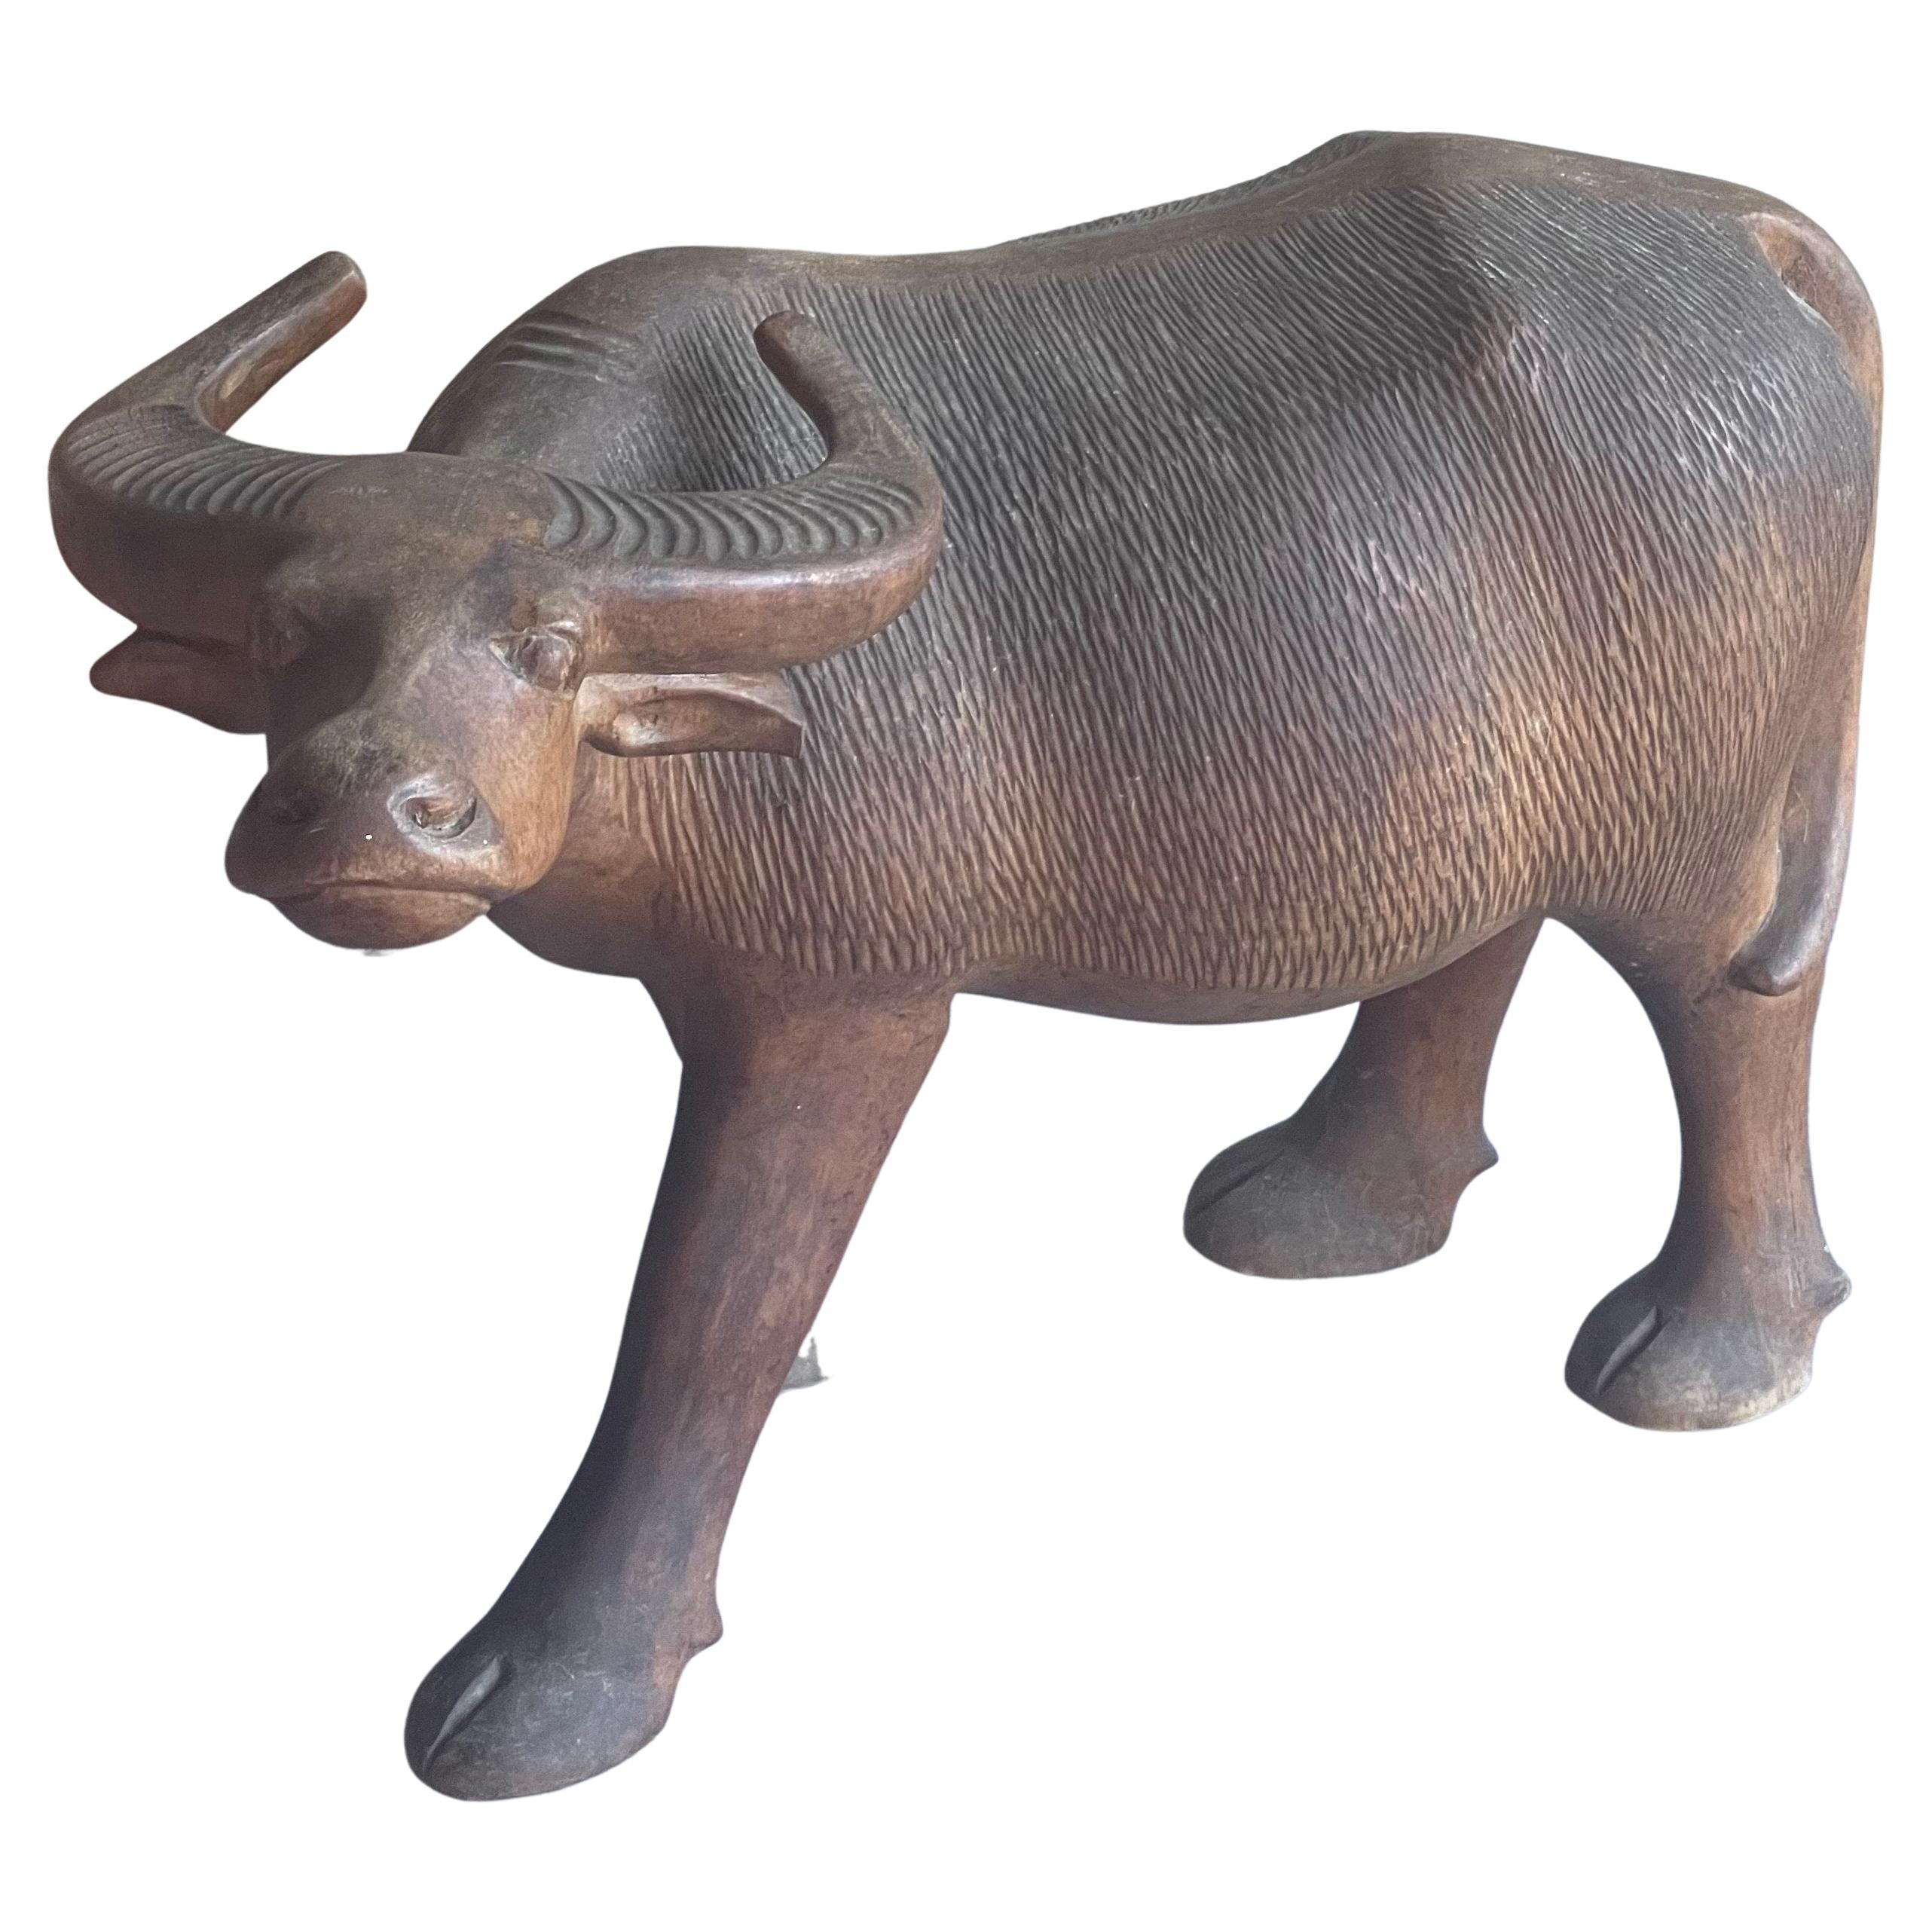 3 1/2” Long Vintage African Carved Wooden Water Buffalo Figurine